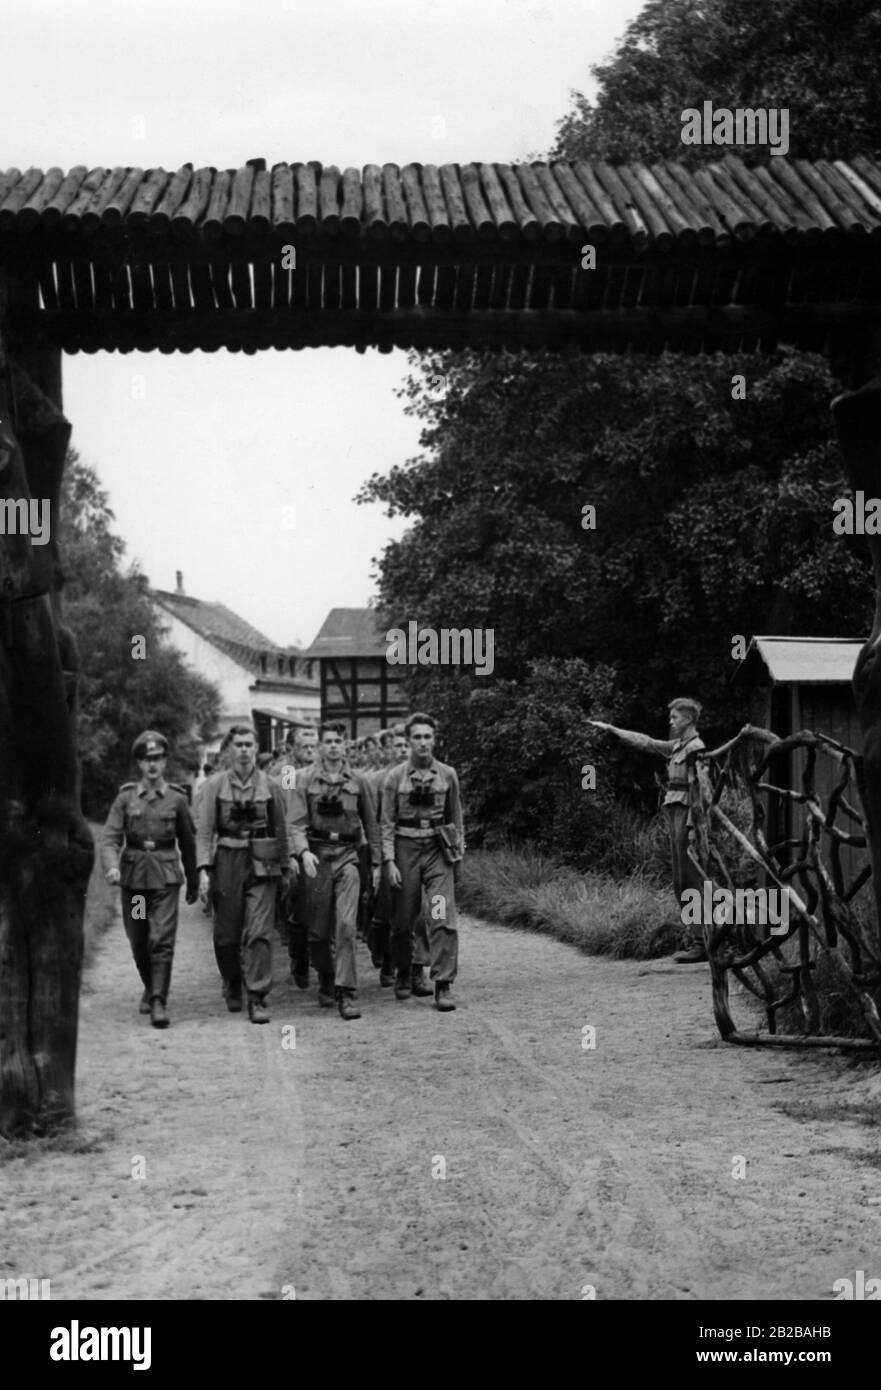 Marching Hitler Youth members in a military training camp. Stock Photo